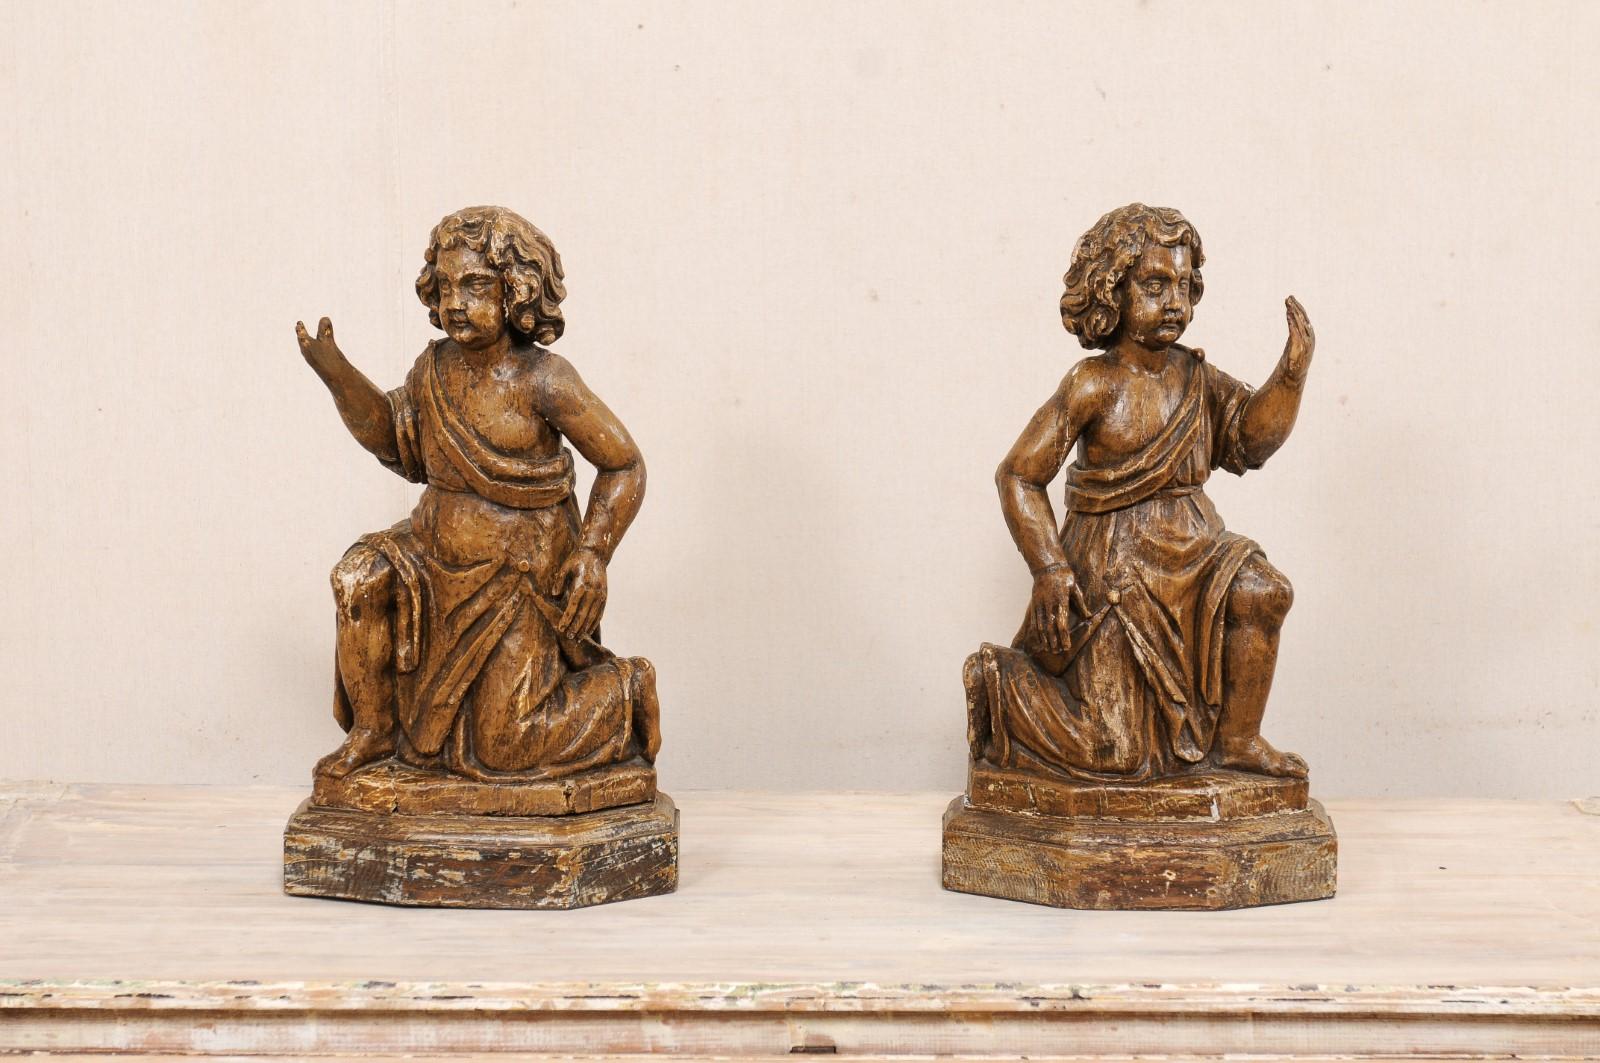 A French pair of carved-wood cherub figures from the 19th century. This antique pair of wooden figurines from France have been hand-carved to depict a male child (or putto) with loosely-curled locks and chubby cheeks, fitted in robed attire, in bent